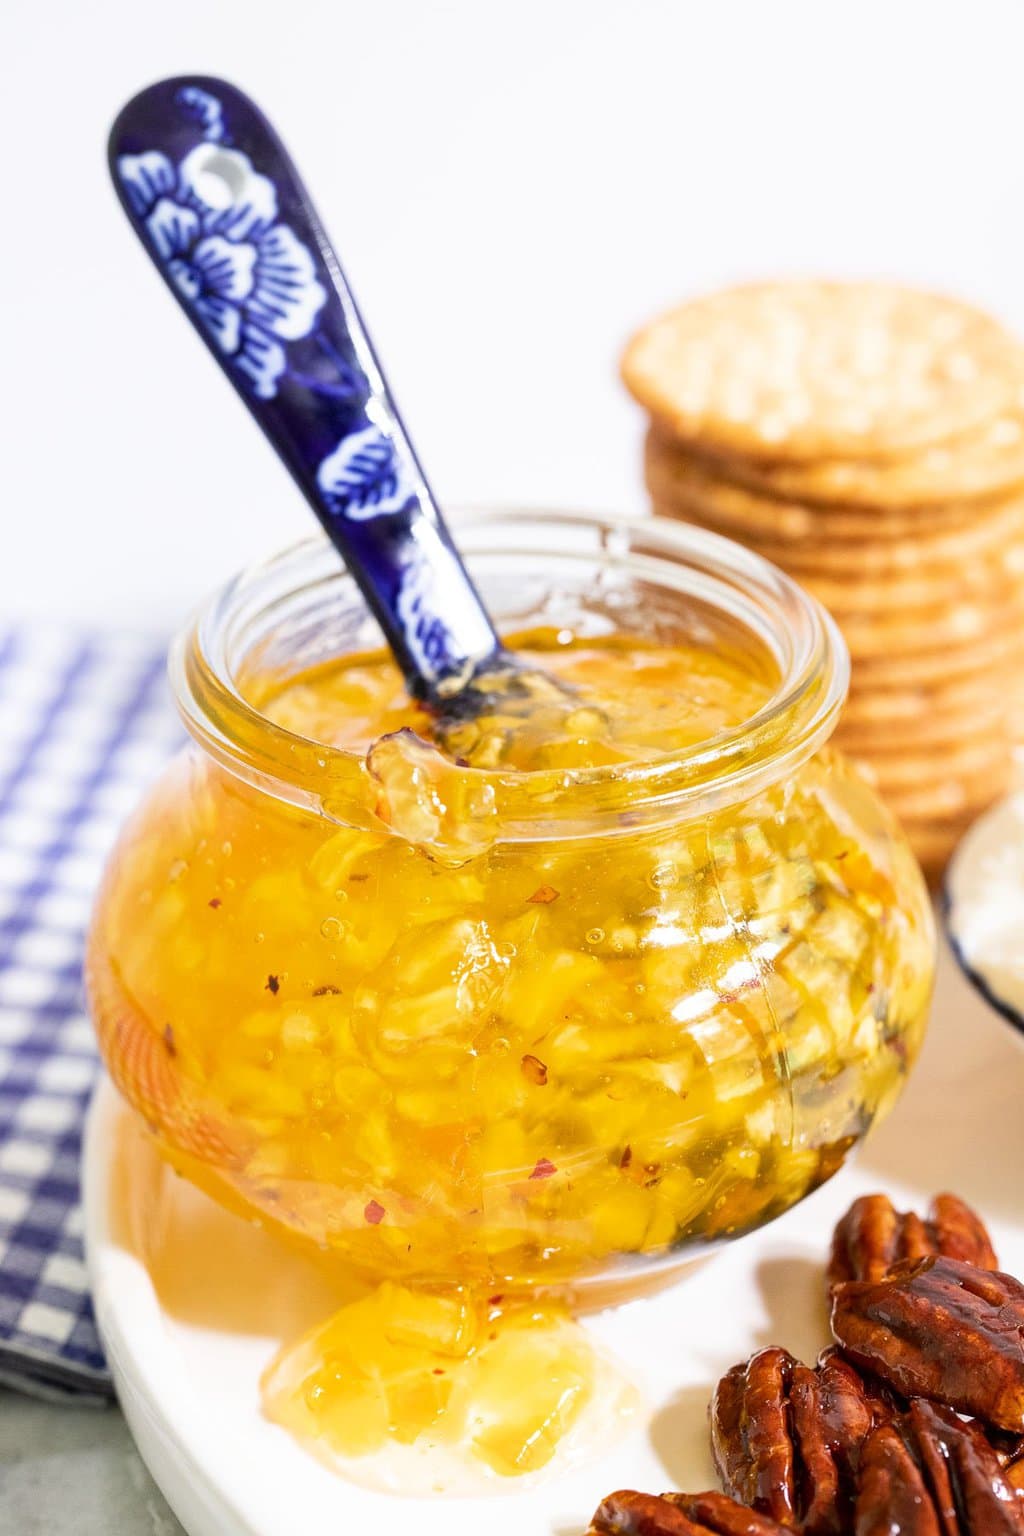 Vertical photo of a Weck glass jar of Pineapple Habanero Pepper Jelly surrounded by appetizer items.